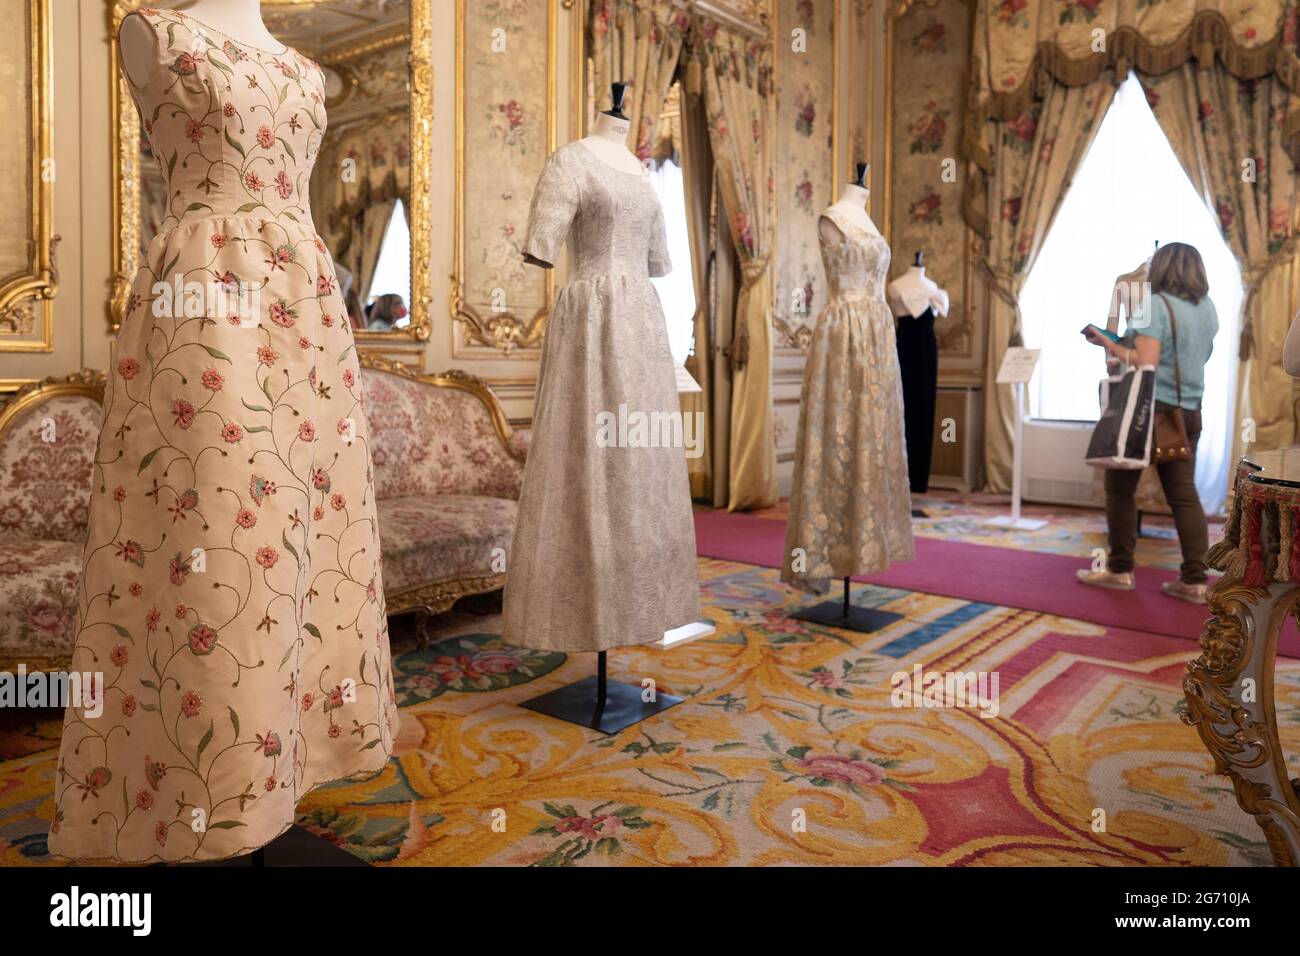 Madrid, Spain. 08th July, 2021. Design collection of Balenciaga seen during  the La Influencia De Los Maestros Espanoles exhibition at the Fernan Nunez  palace in Madrid. Credit: SOPA Images Limited/Alamy Live News